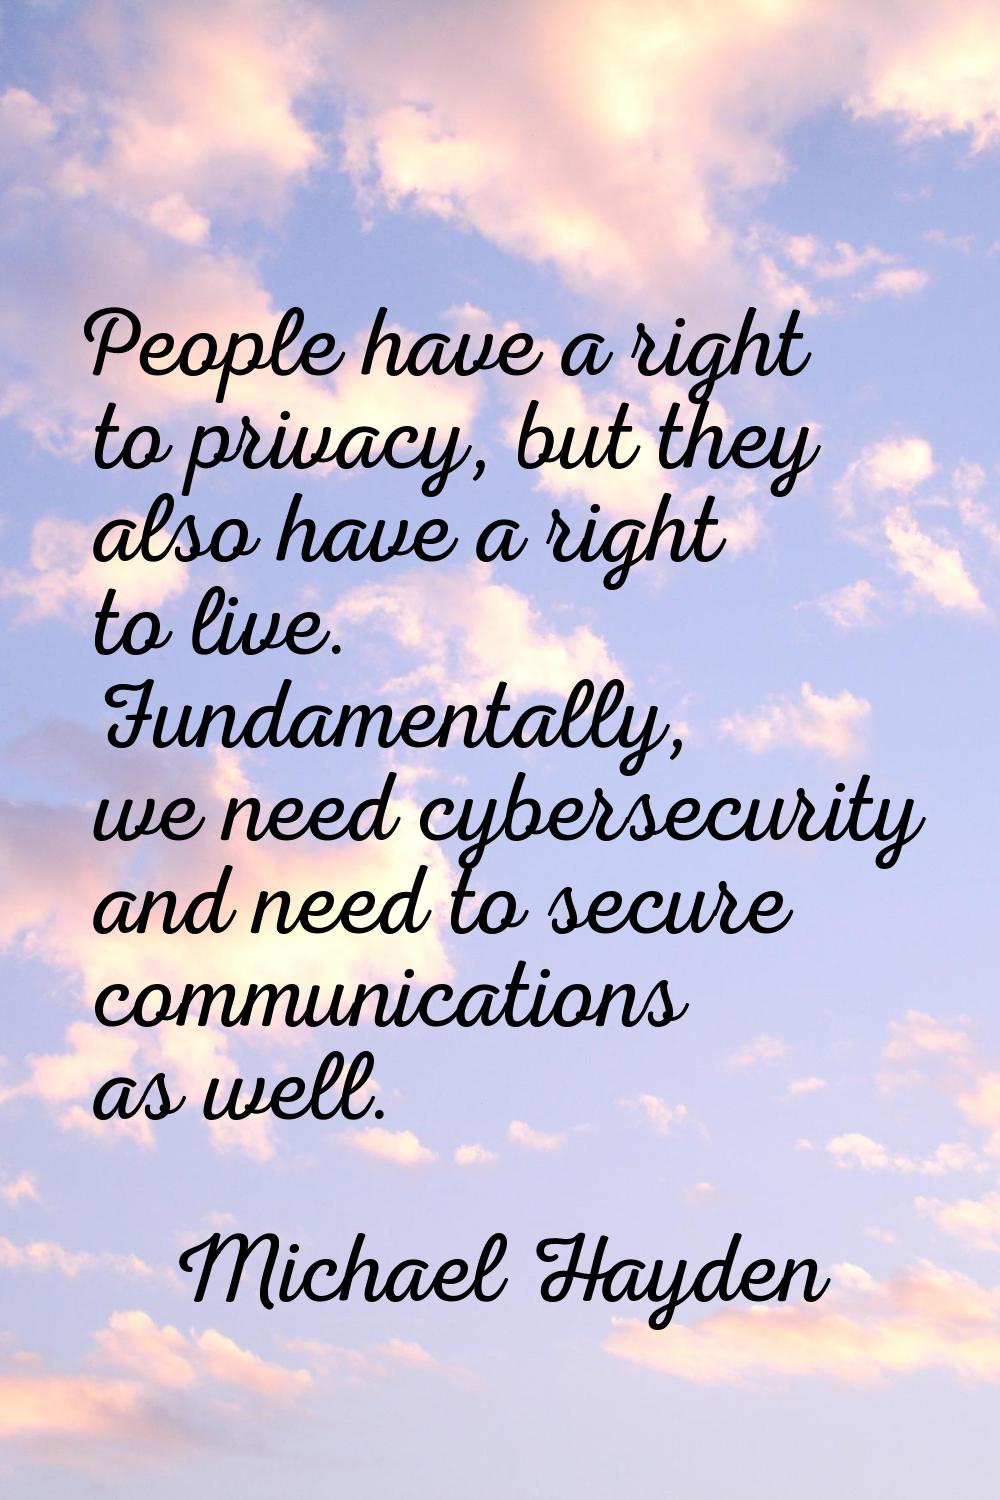 People have a right to privacy, but they also have a right to live. Fundamentally, we need cybersec